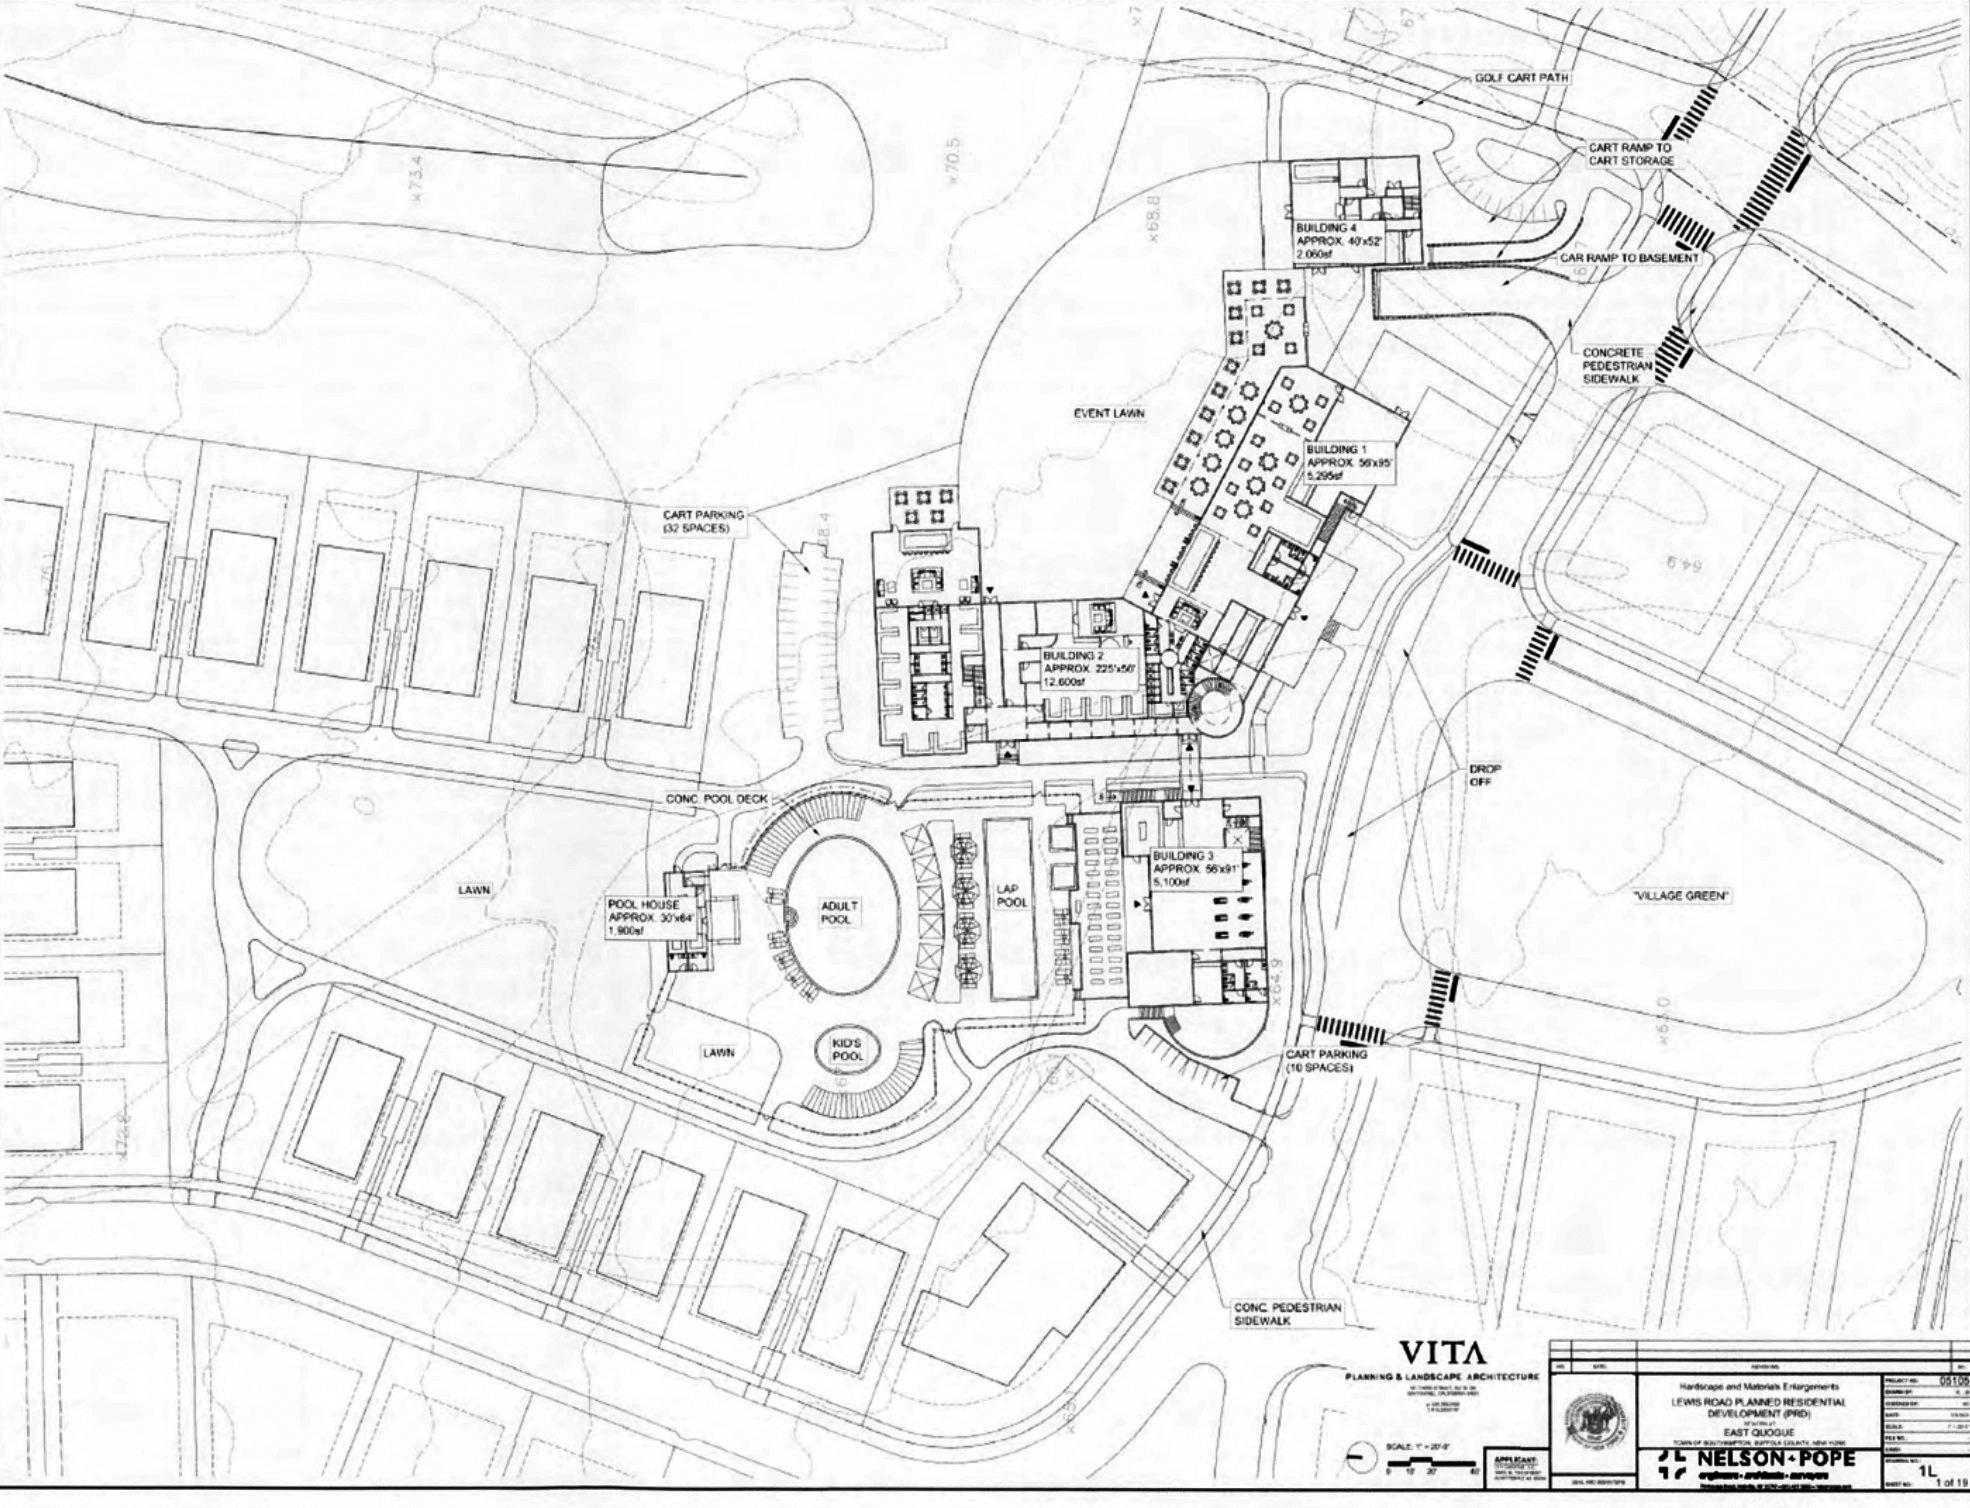 The schematic design of the Lewis Road golf resort site plan.